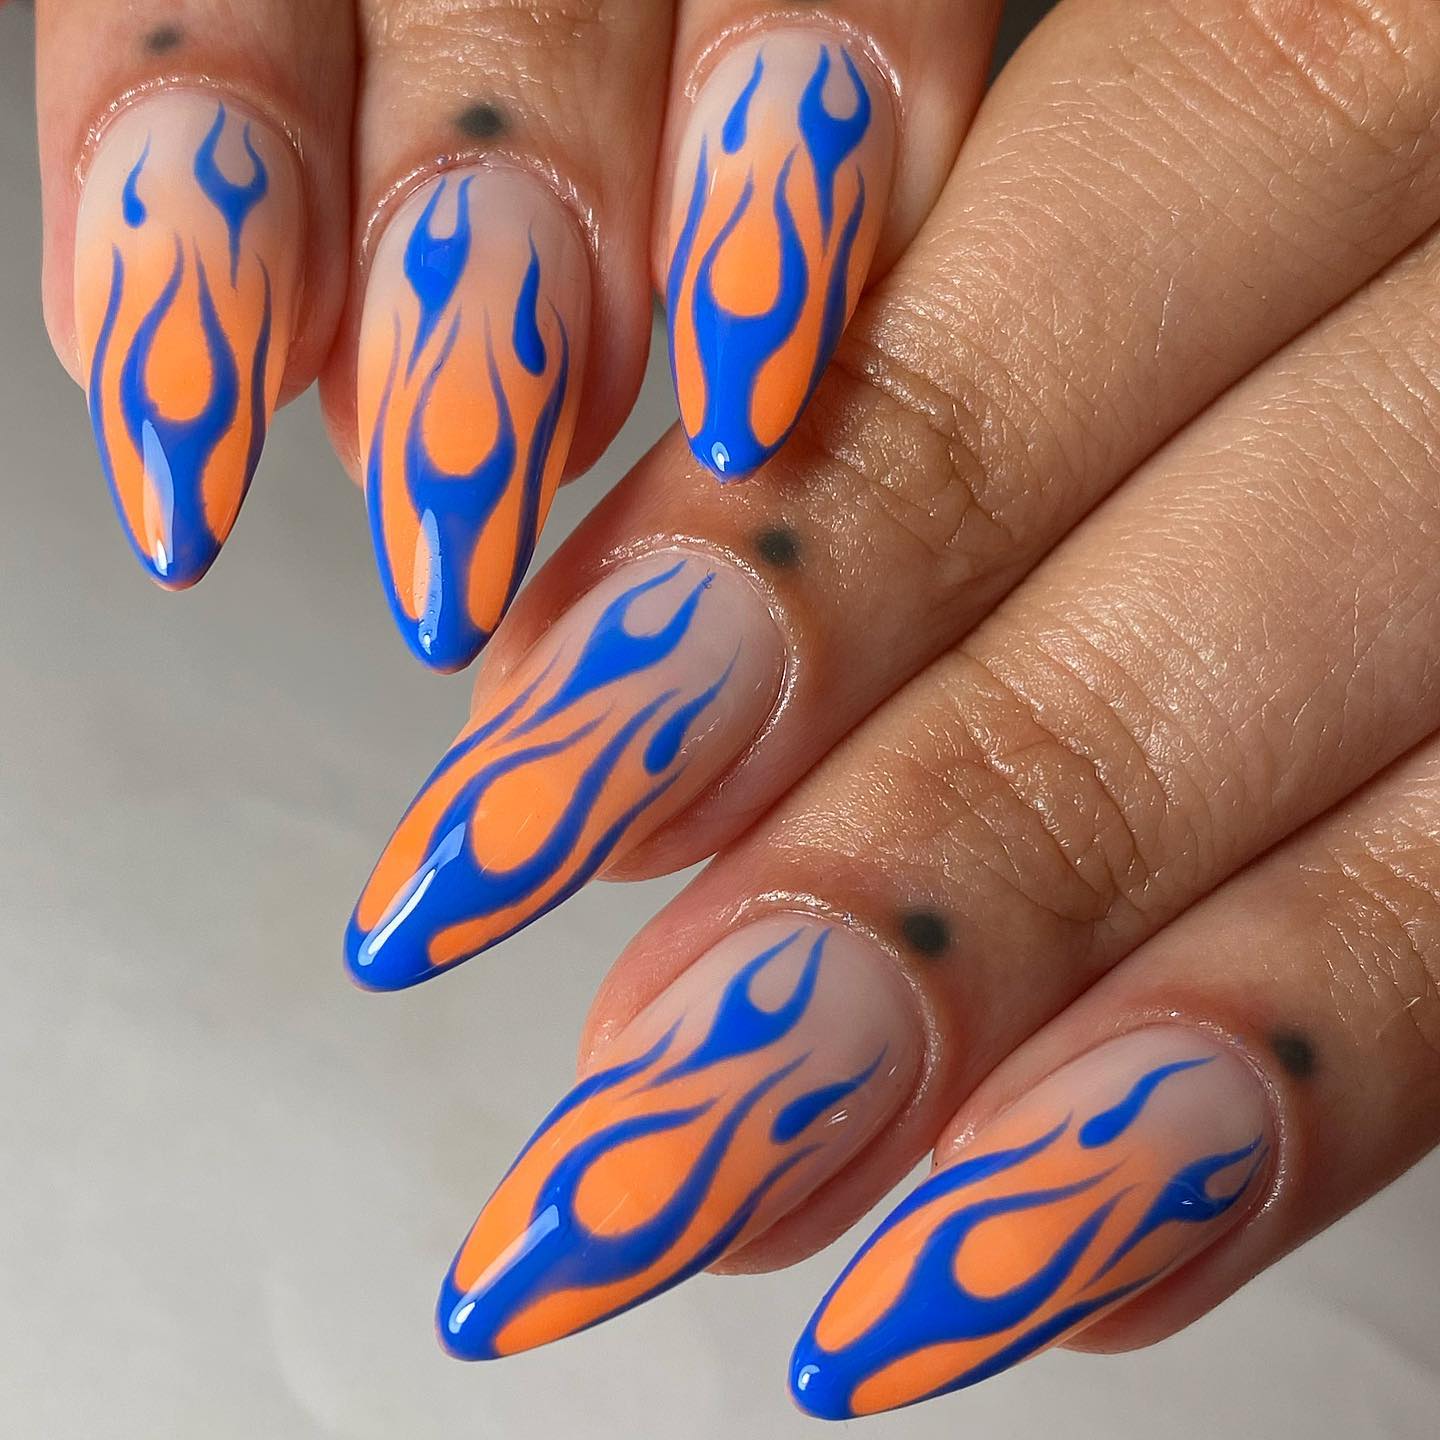 Orange and blue colors are quite striking that it is almost impossible to miss them out. On your nude and plain nails, this color combo of flame nail art will shine like stars. It's time to get them!